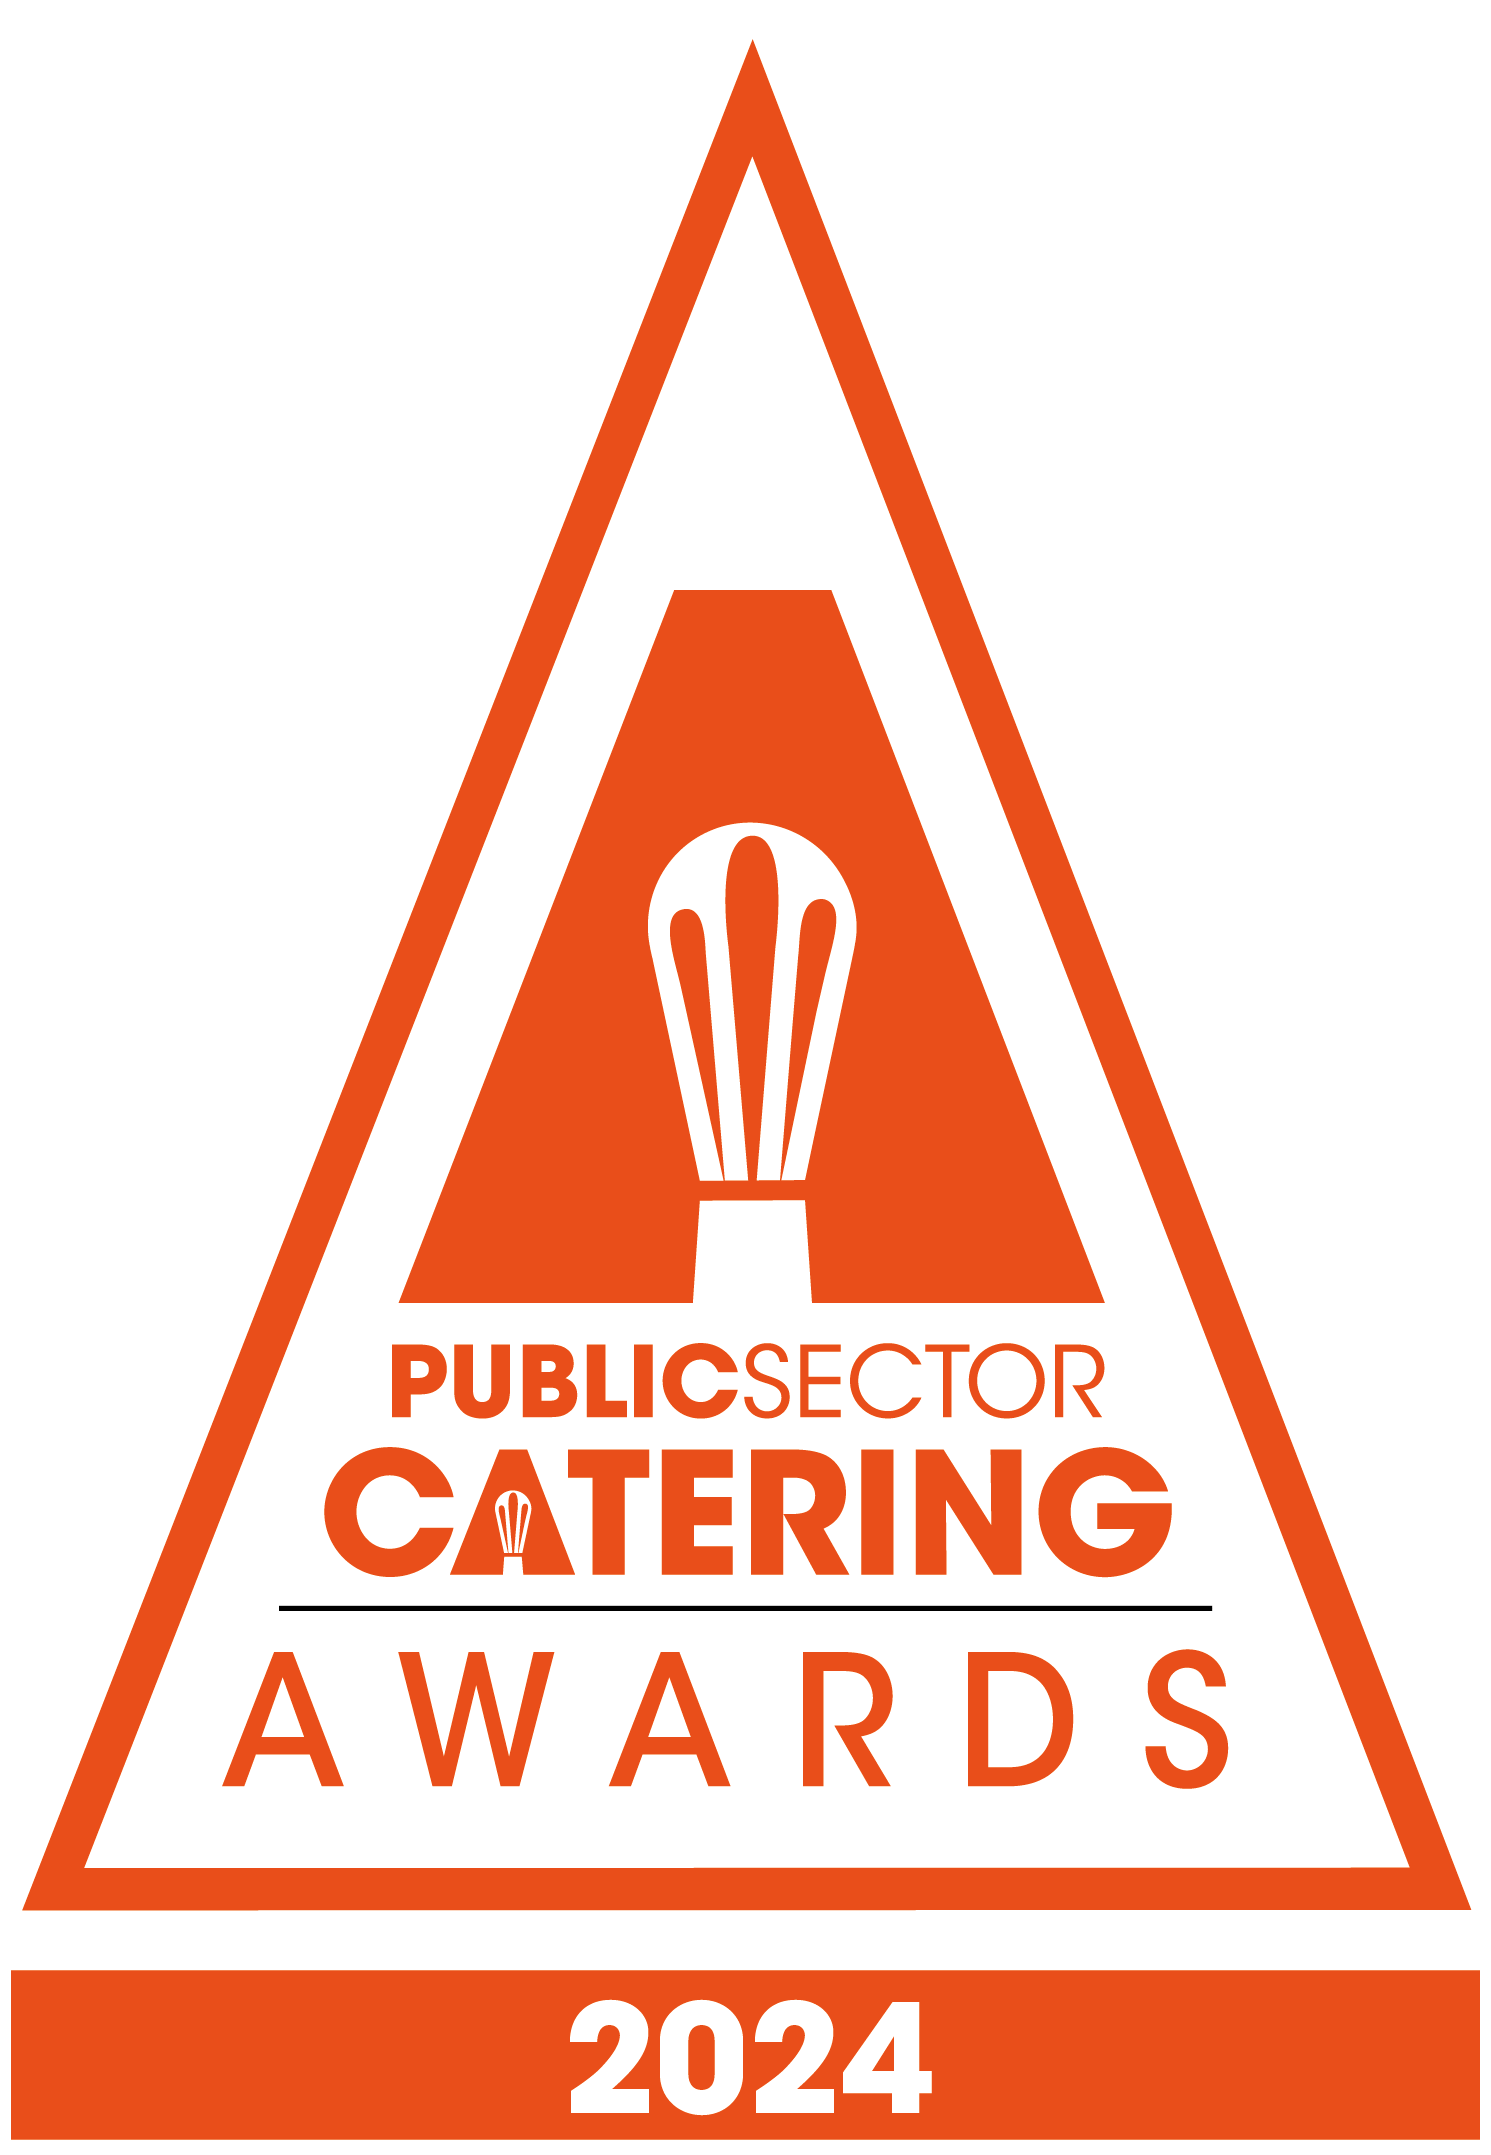 Public Sector Catering Awards 2024